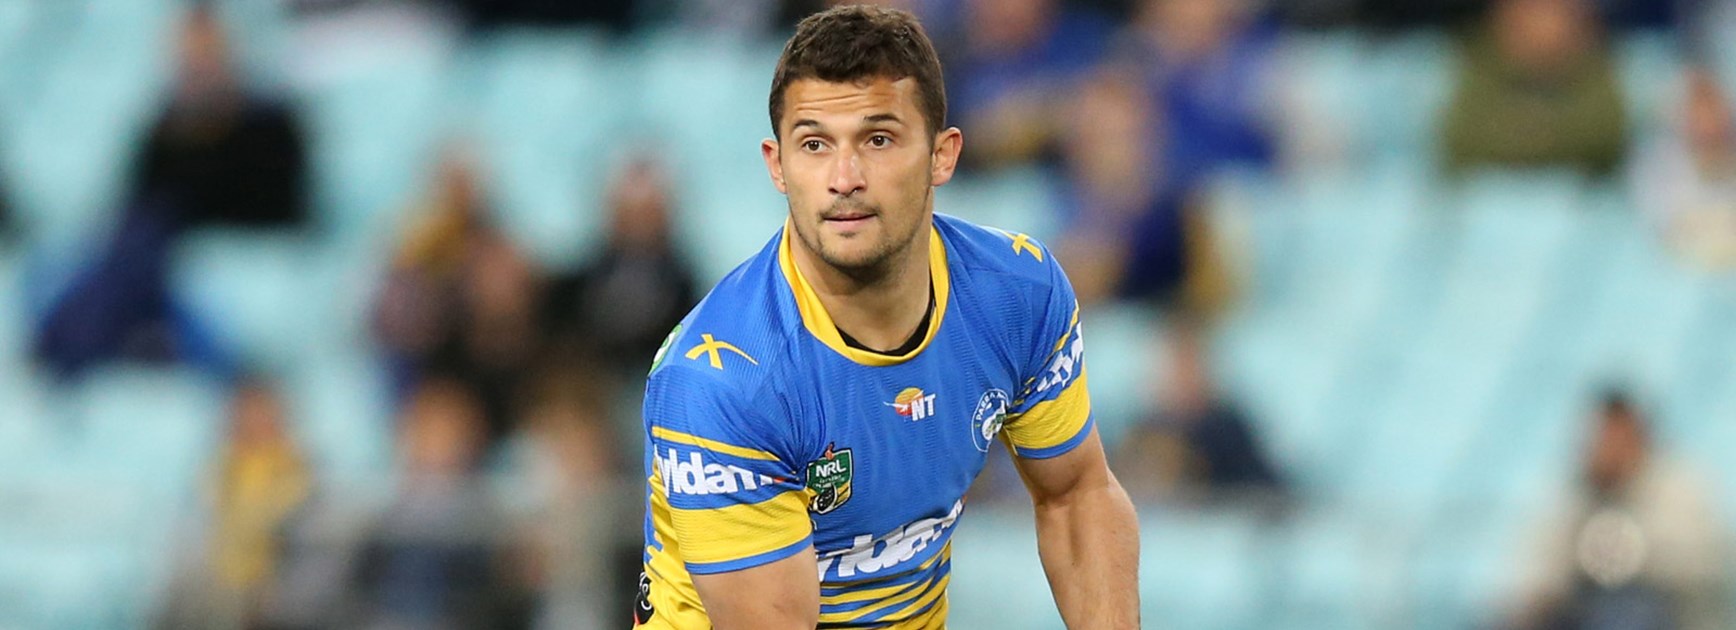 Eels halfback Luke Kelly has a chance to impress in first grade following the departure of Chris Sandow.